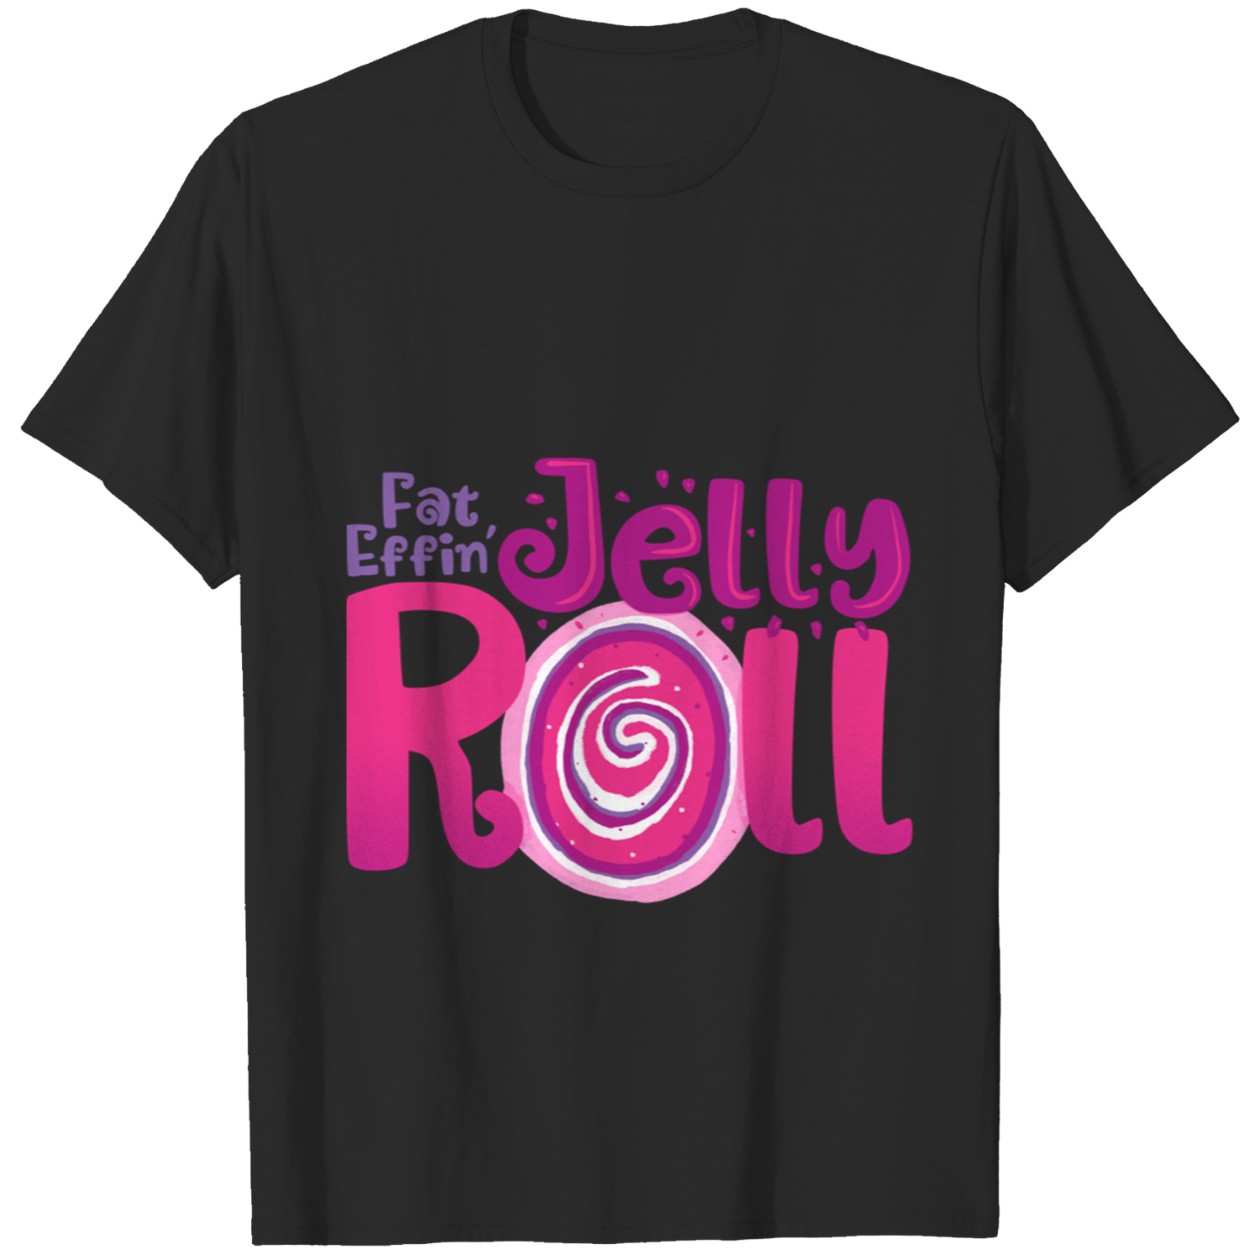 Fat Effins Jelly Roll Graphic Tee DZT